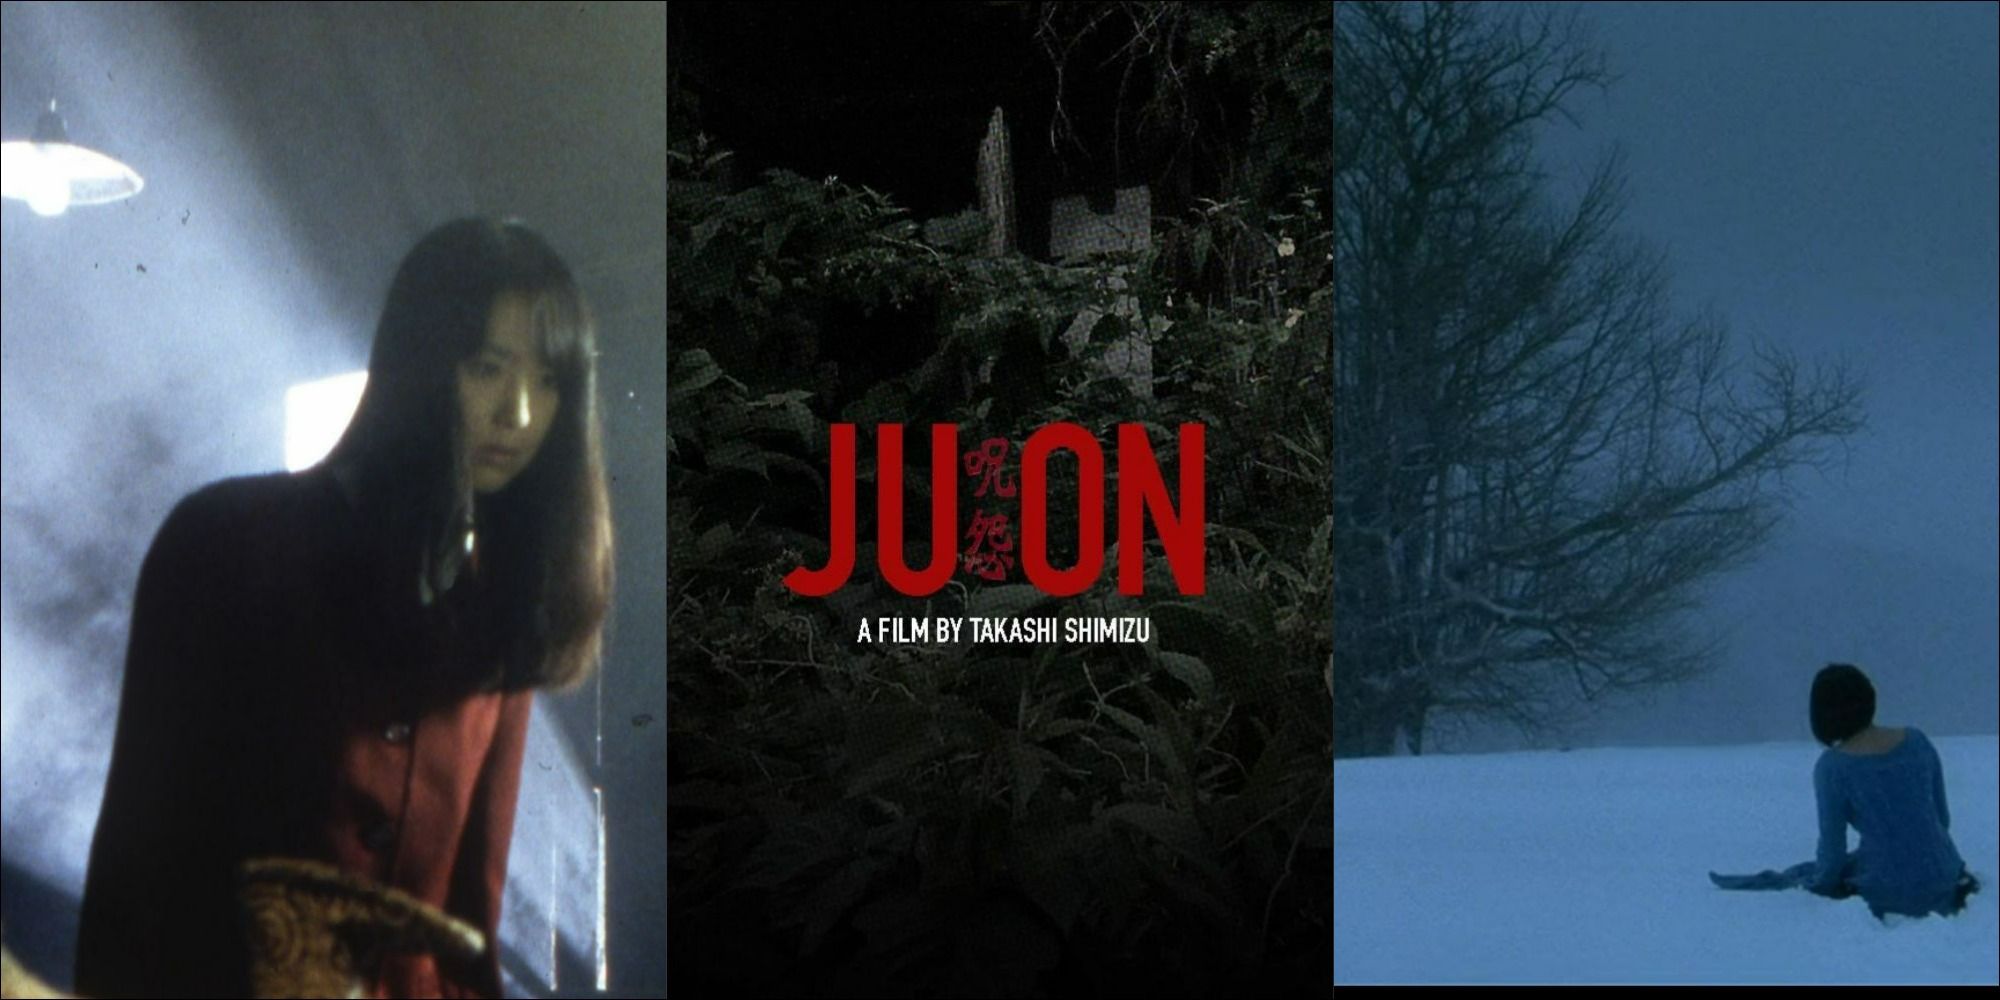 The title card from Ju-On: The Grudge and characters from Uzumaki and Three...Extremes